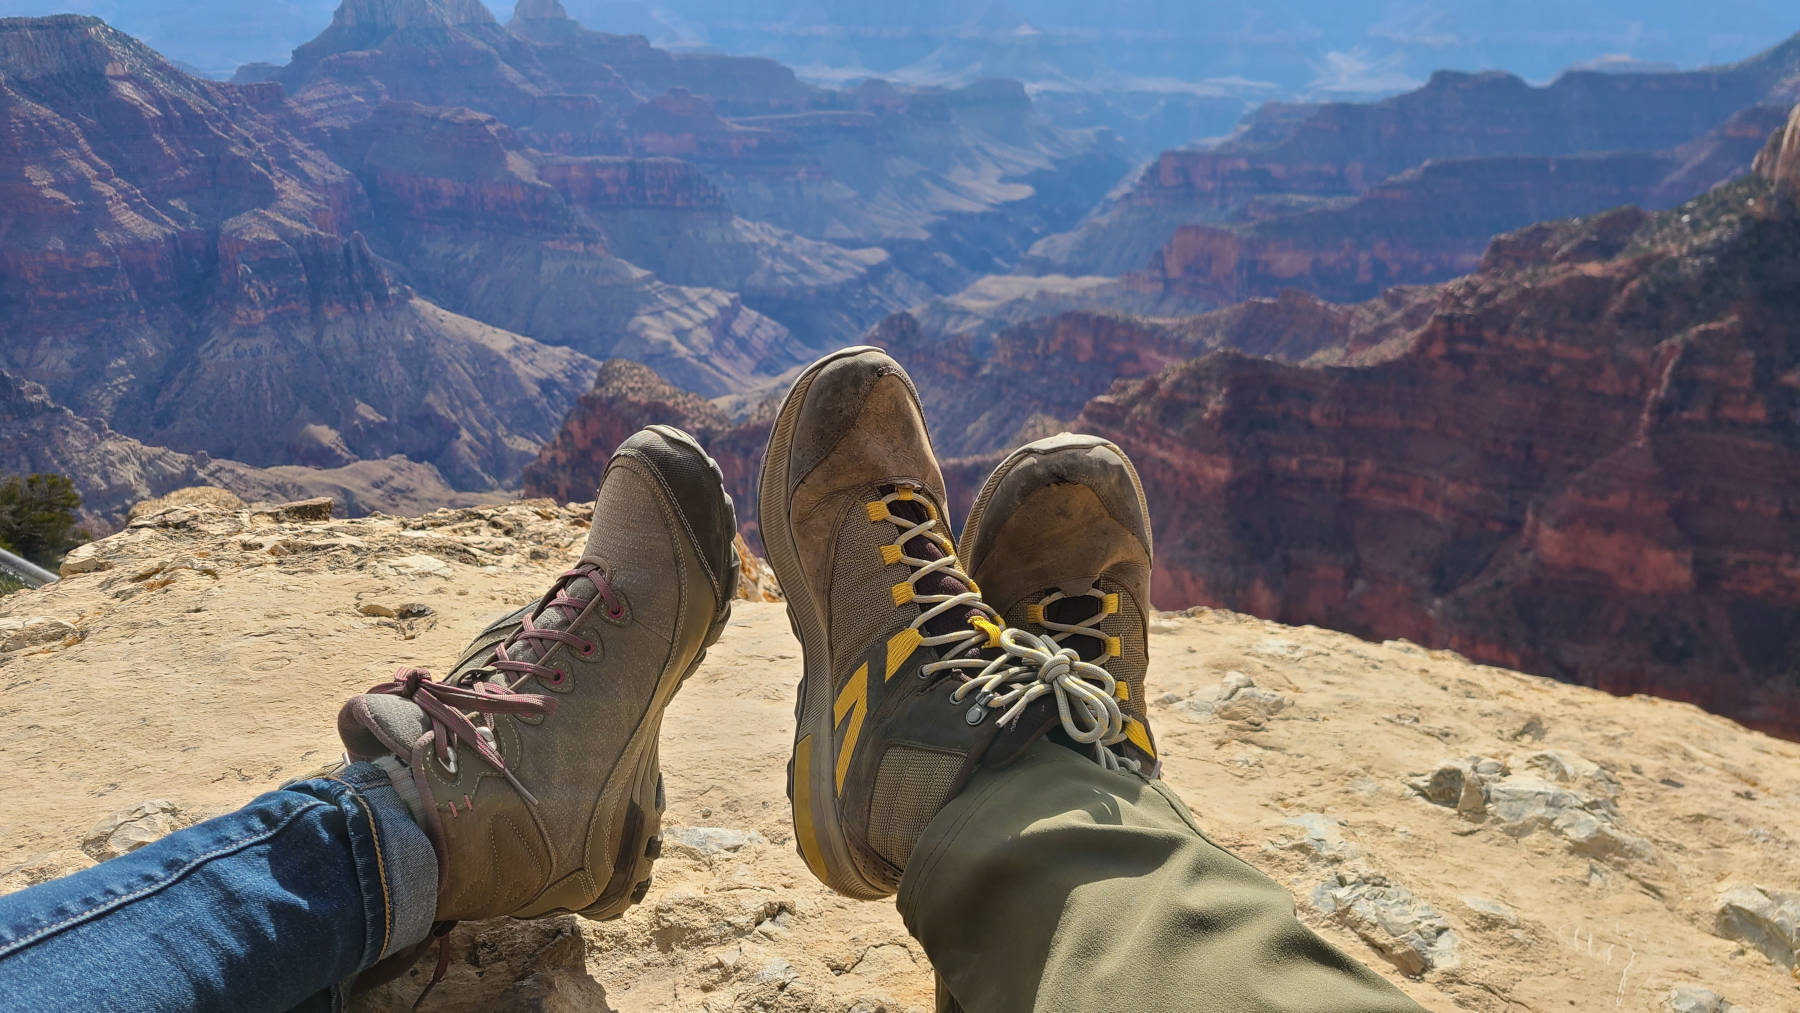 Ashley and Andrew's hiking boots with a view of the Grand Canyon in the background